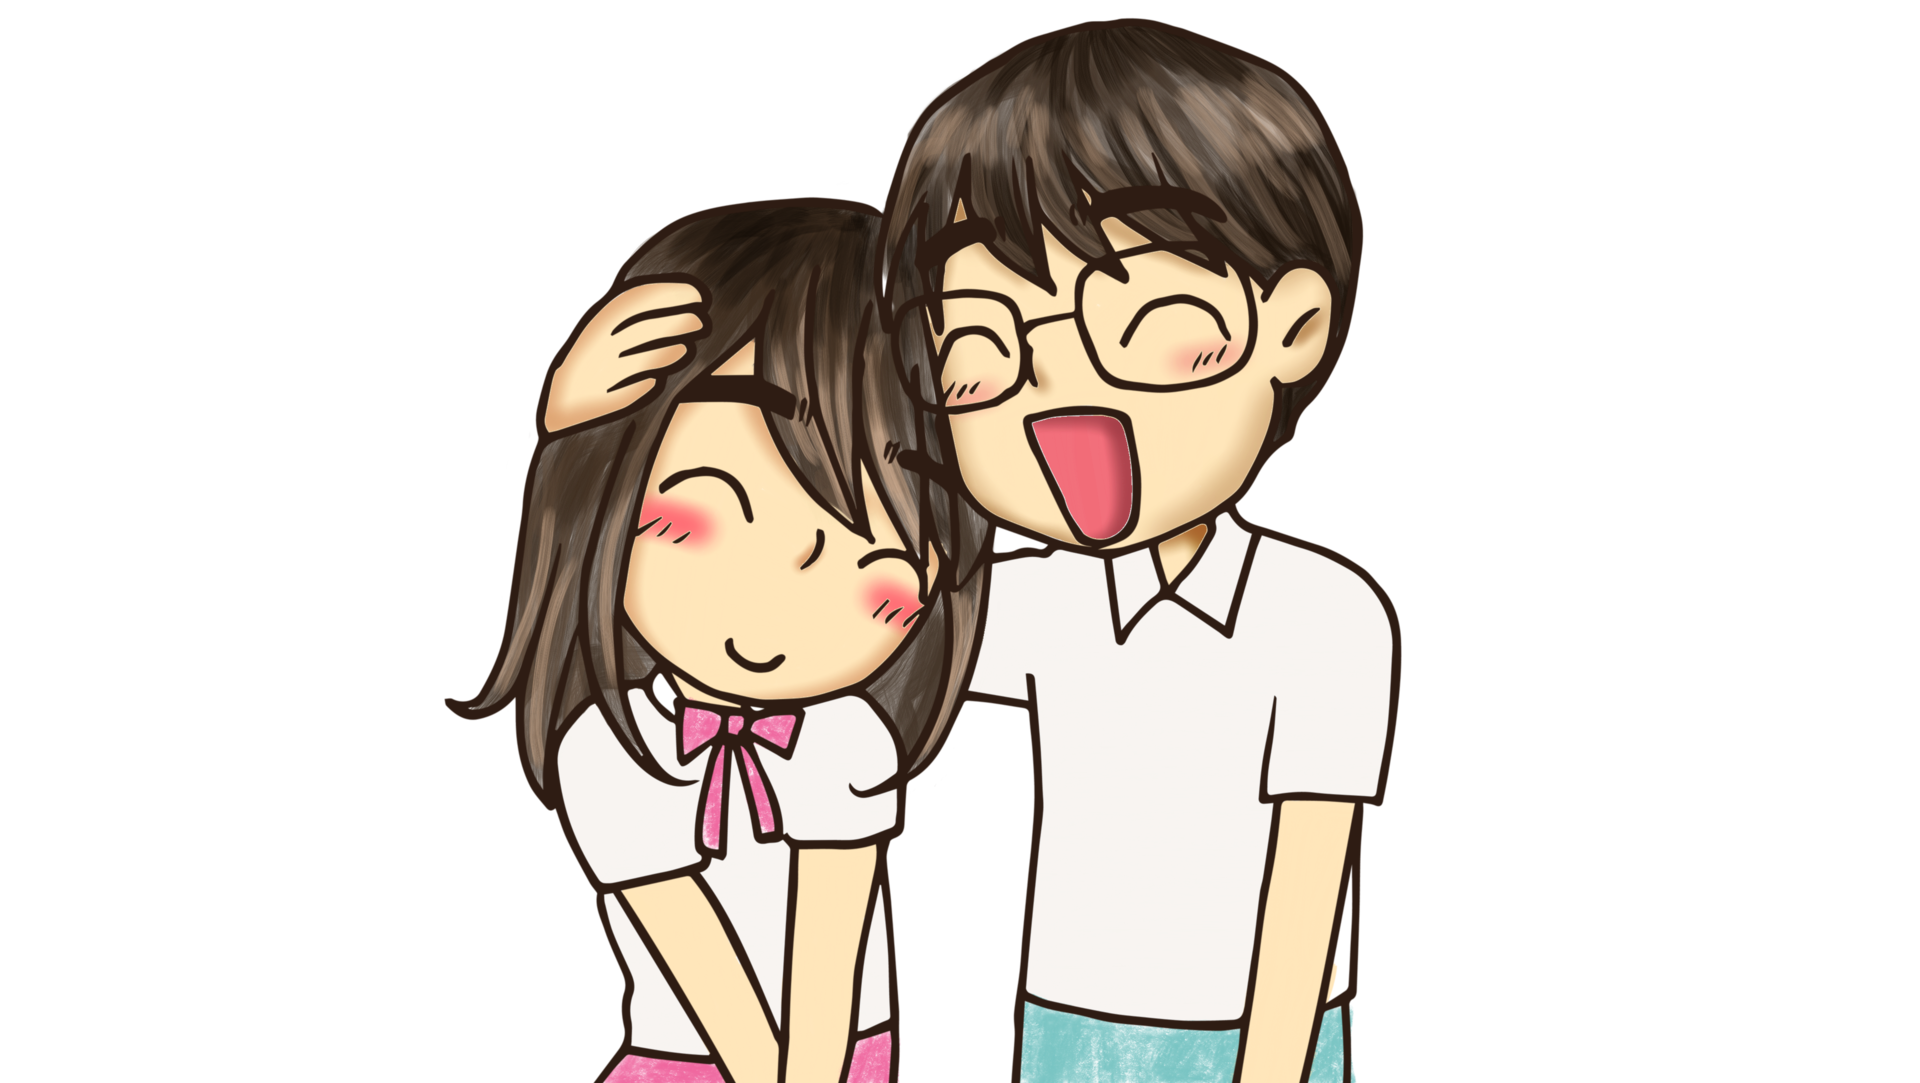 love man and woman marriage couple Anime Cute Character Cartoon Model ...